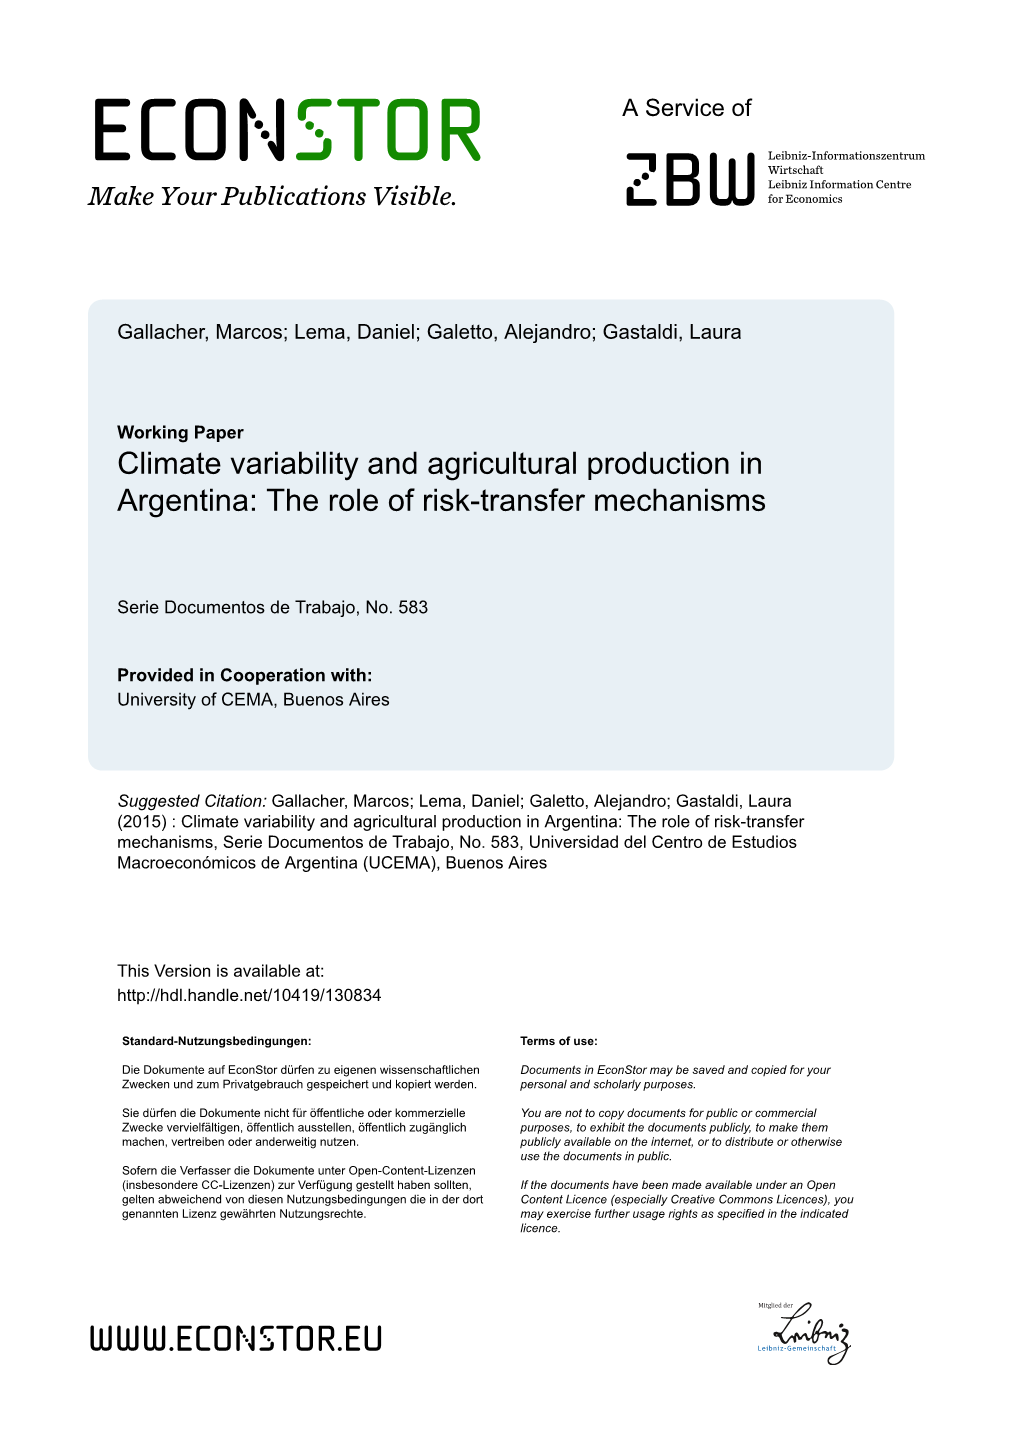 Climate Variability and Agricultural Production in Argentina: the Role of Risk-Transfer Mechanisms